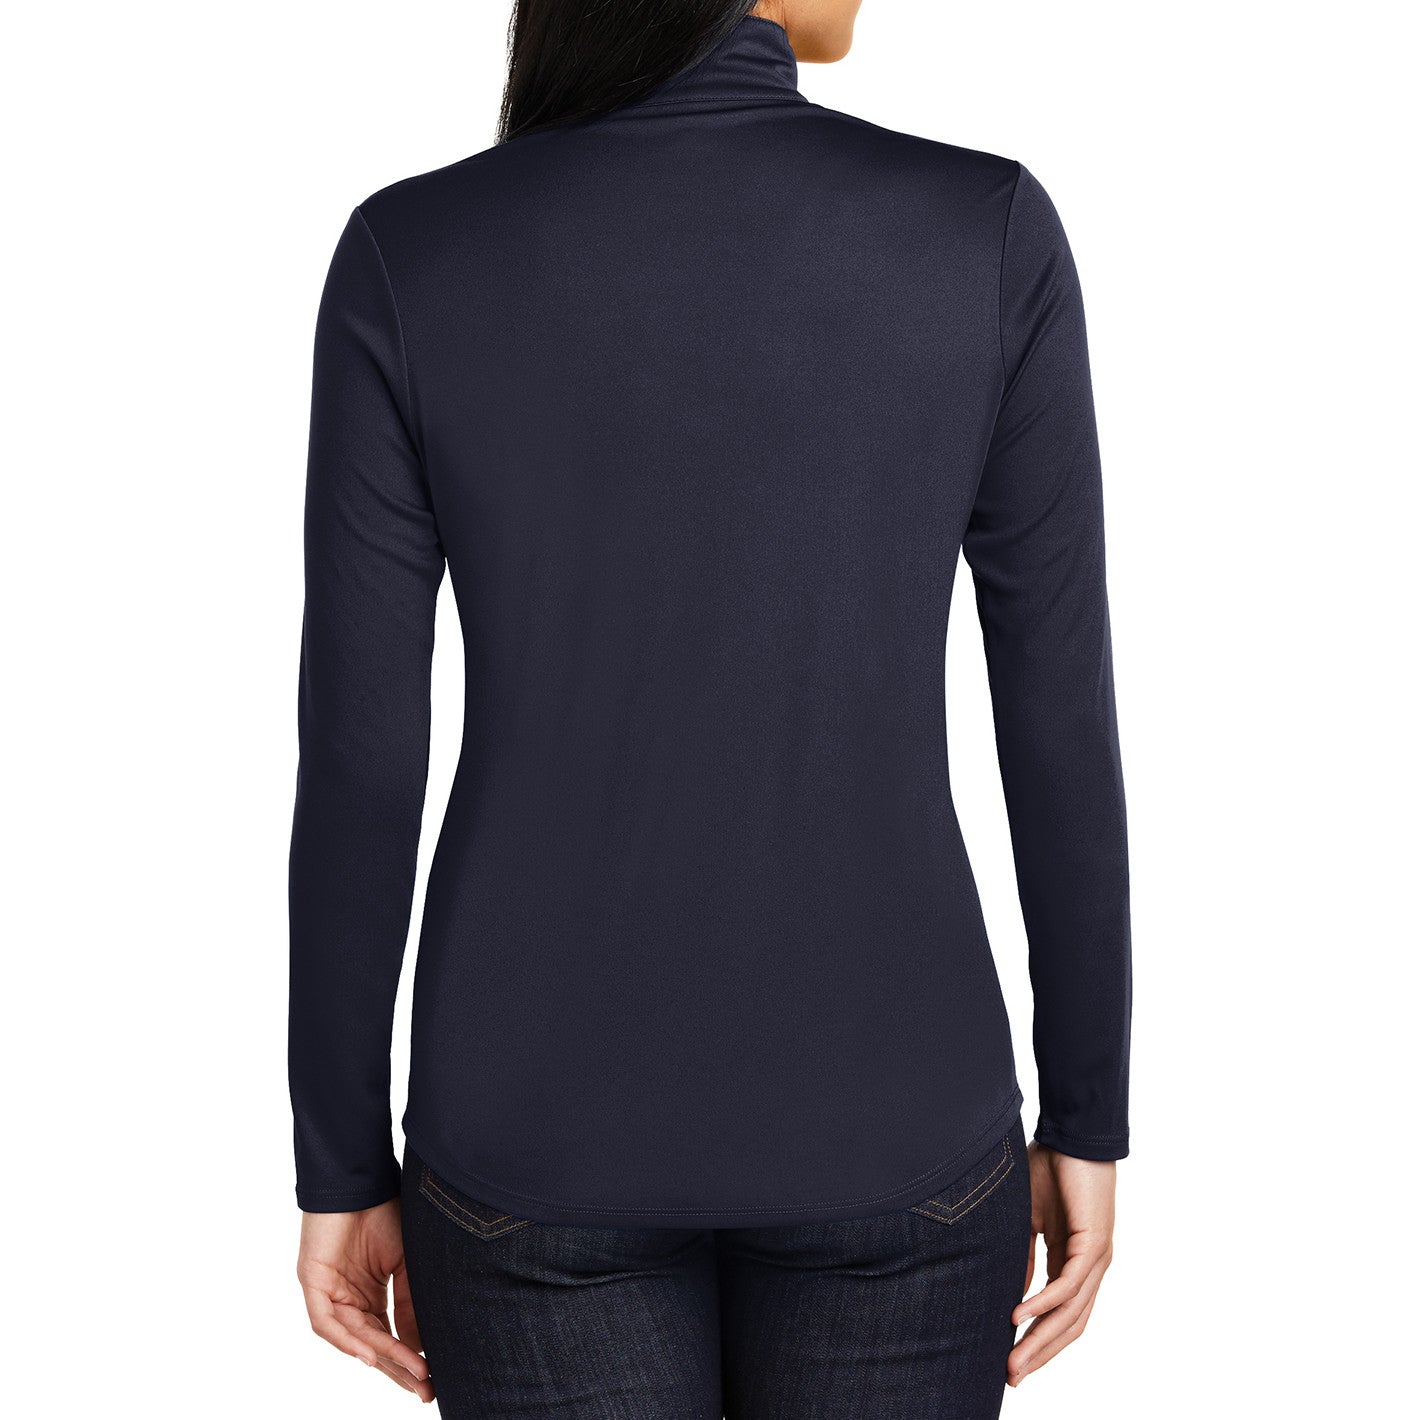 Women’s PosiCharge Competitor 1/4-Zip Pullover